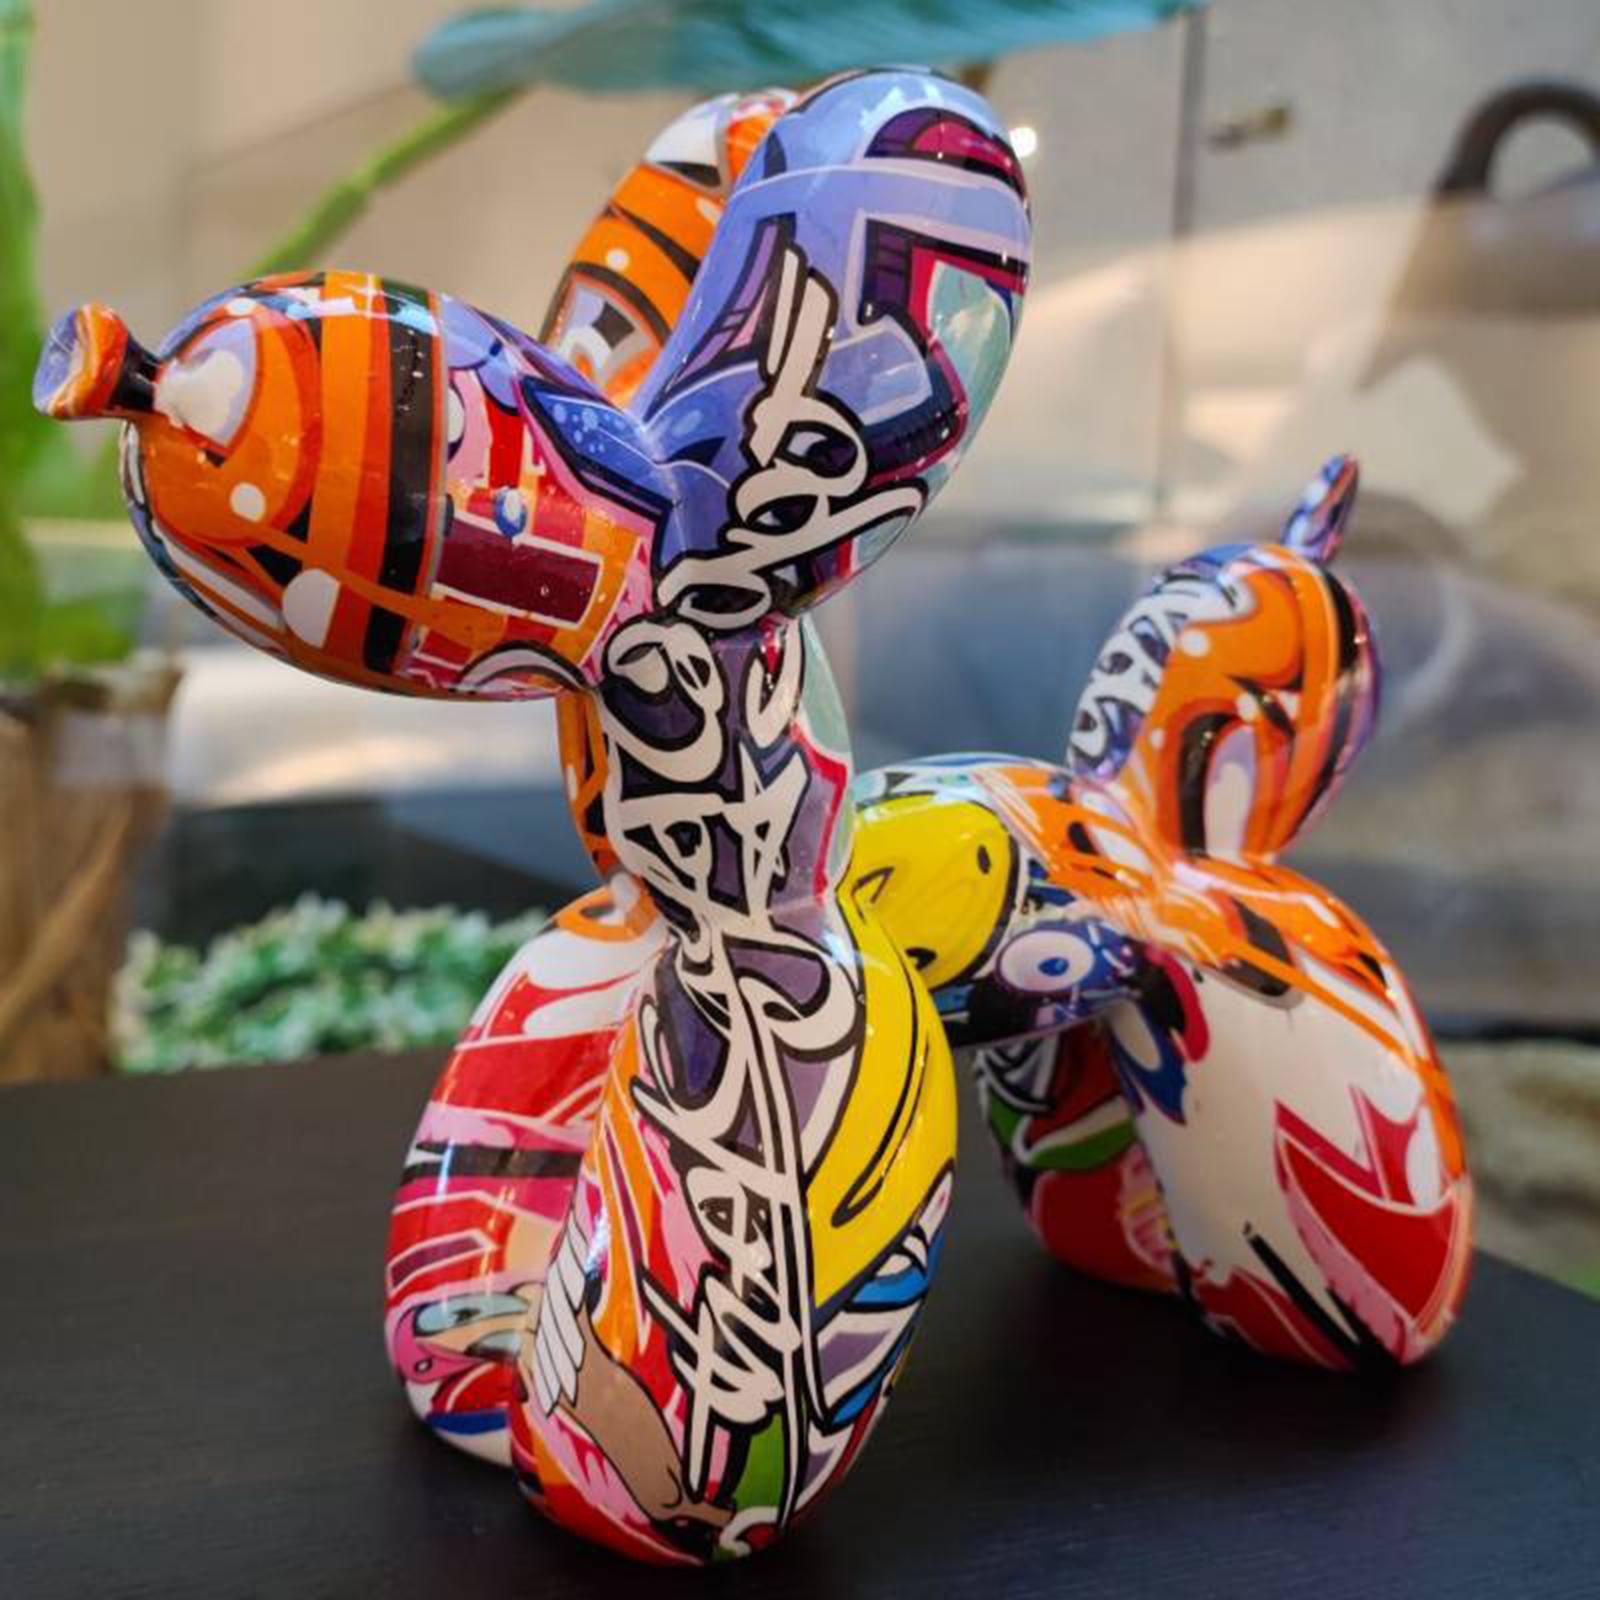 Scribble Balloon Dog Sculpture Statue Kids Room Bedroom Home Ornament A